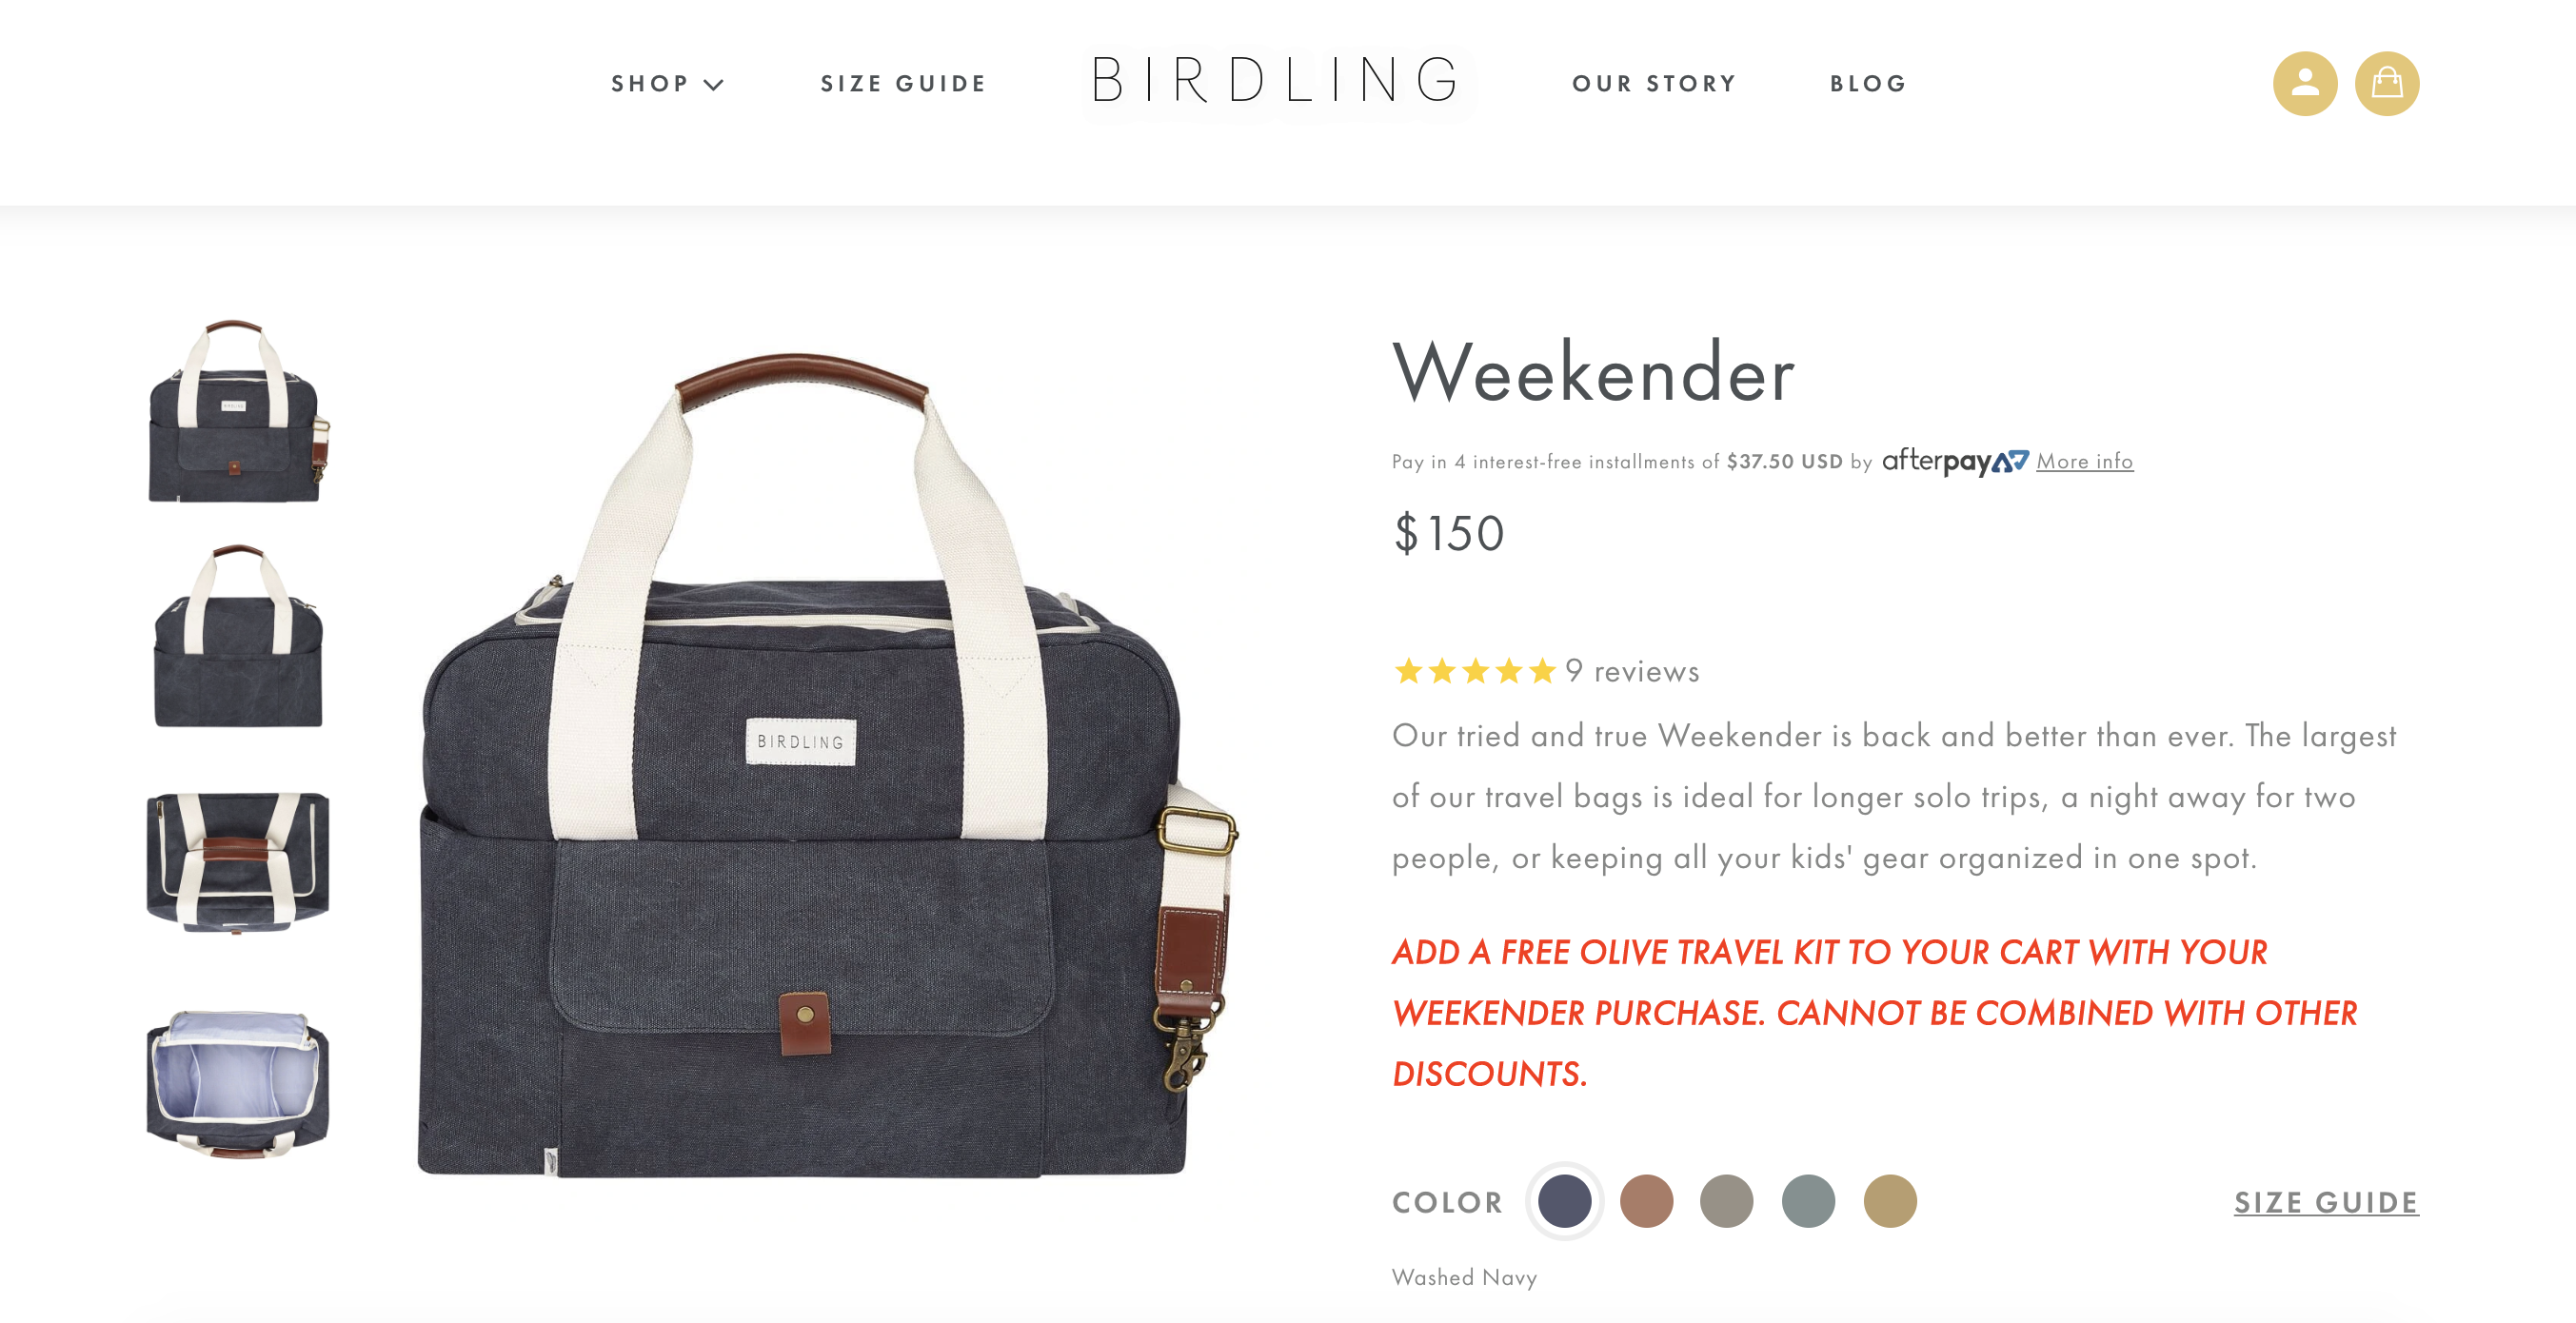 Birdling showcases product reviews at the top and bottom of the product page.